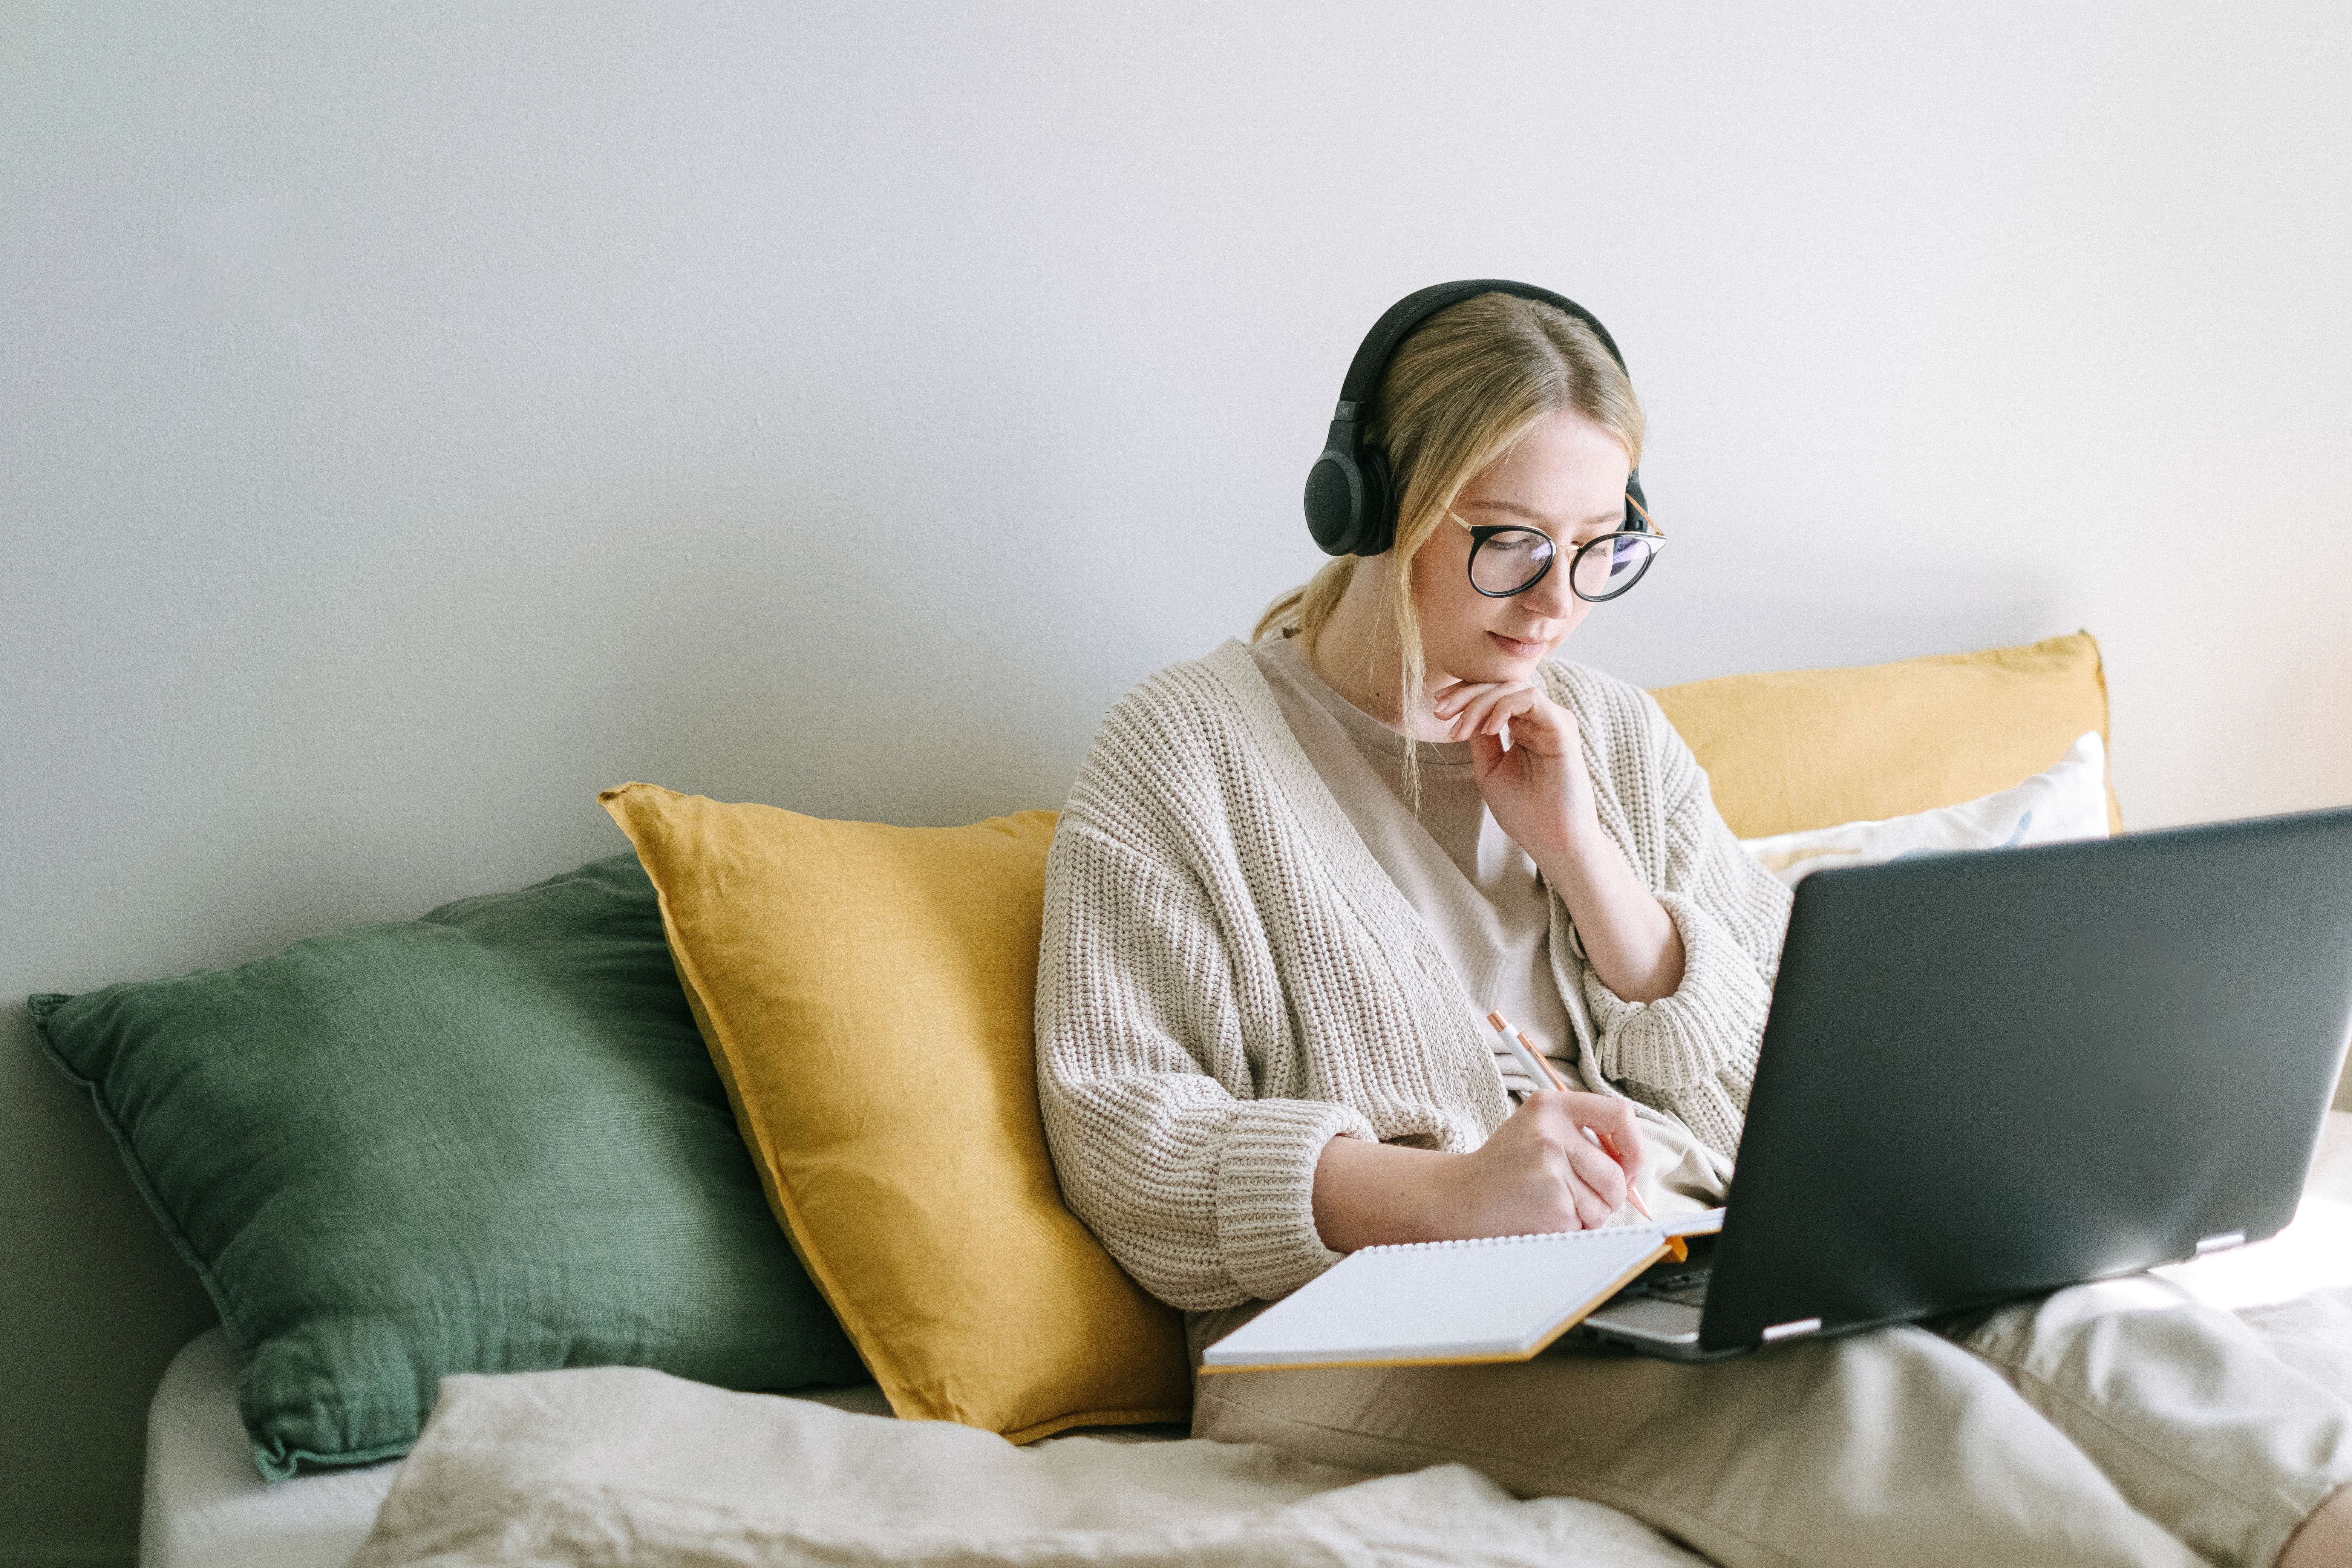 A woman using her laptop | Source: Pexels